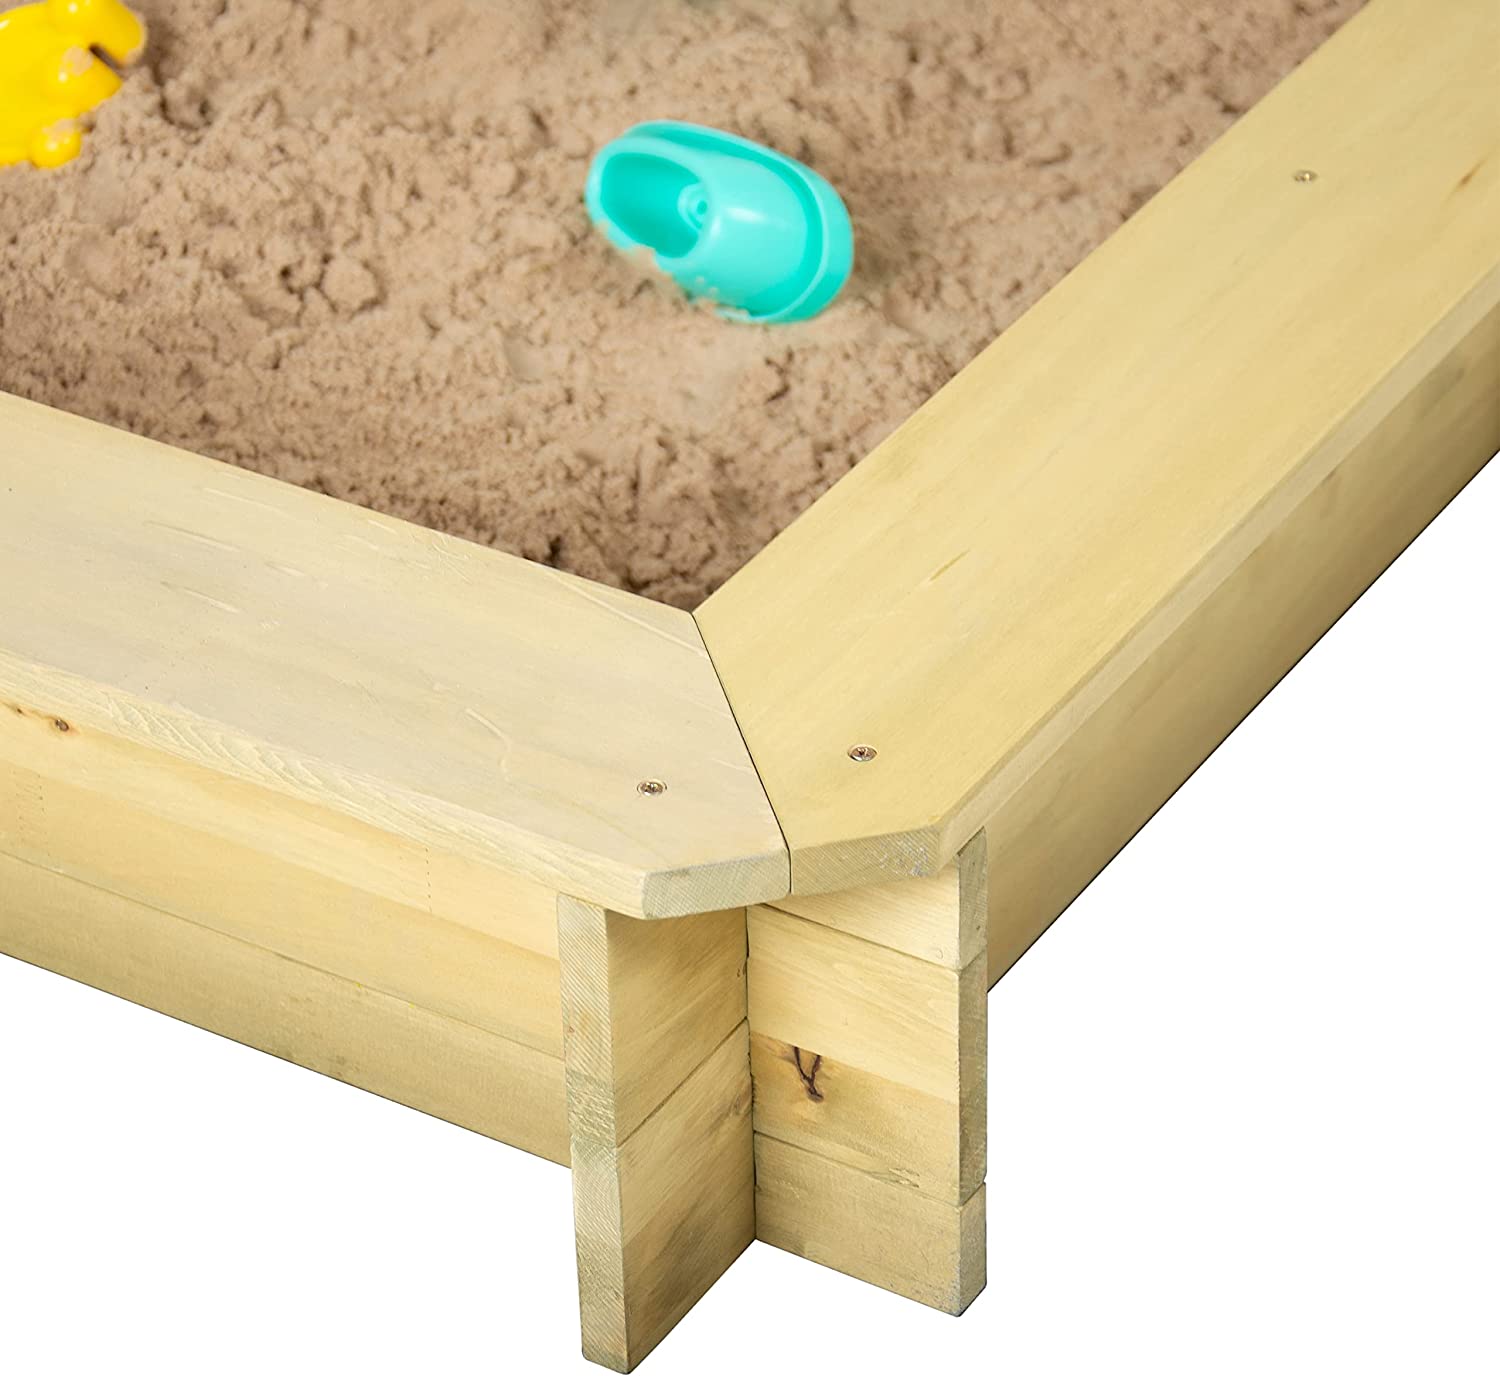 TP Toys TP275 TP Wooden Sandpit with Sun Canopy, 2 Years+